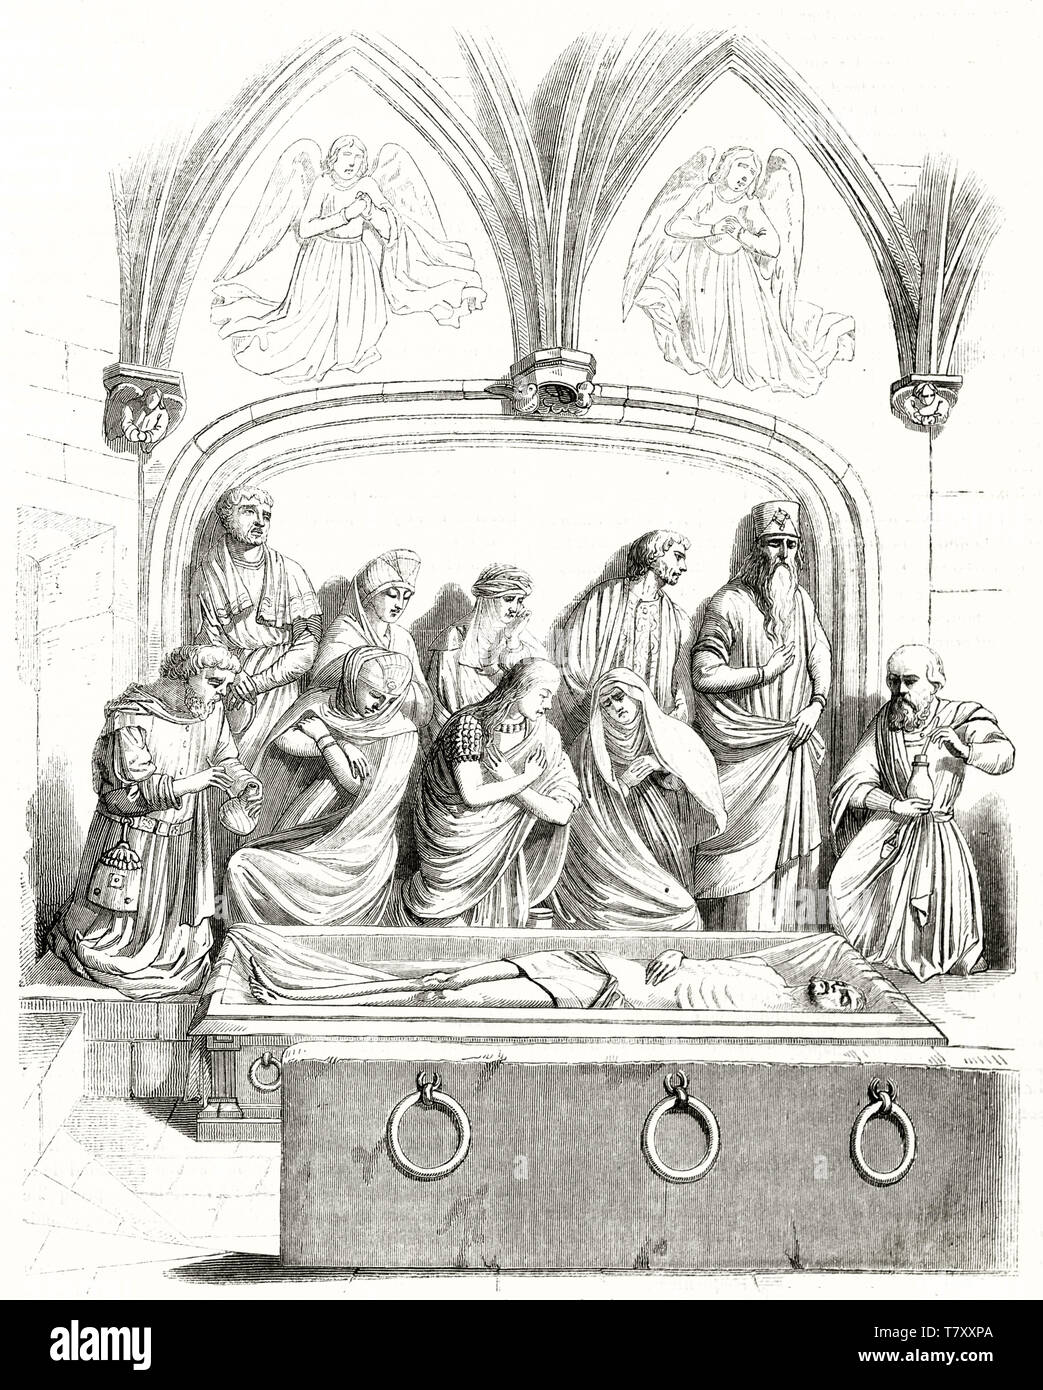 Ancient reproduction of the religious statues in St-Jean-Baptiste sepulcher in the homonym basilica in Chaumont France. By unidentified author publ. on Magasin Pittoresque Paris 1848 Stock Photo